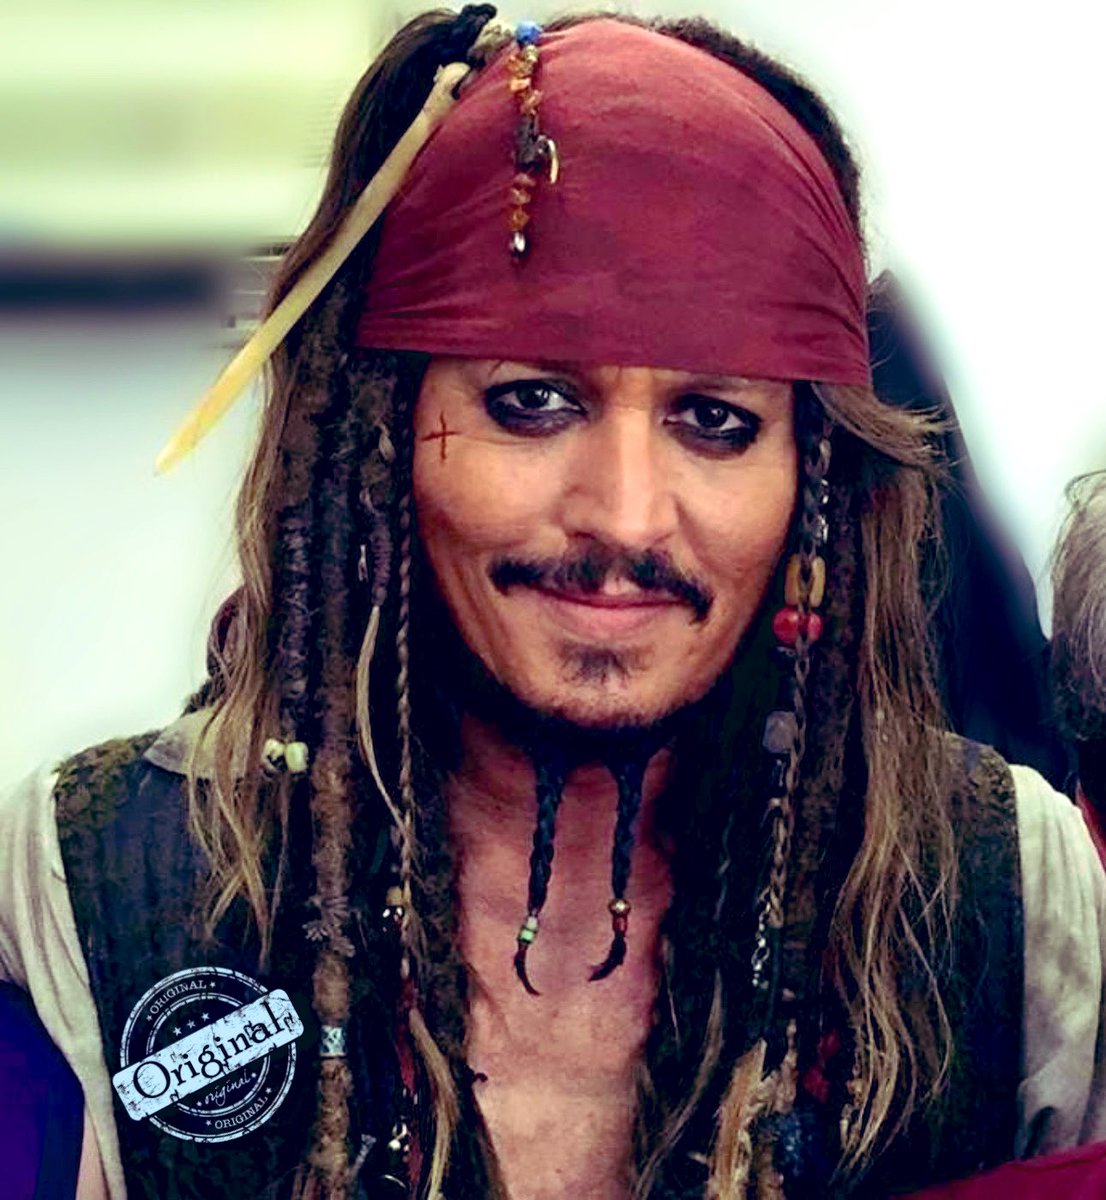 First you kick him in the butt and now you want to copy him @Disney? Seriously? We only accept the original, Johnny Depp as Captain Jack Sparrow!❤️‍🔥🏴‍☠️ #JohnnyDepp #NoJohnnyNoPirates #NoJohnnyNoPOTC #JohnnyDeppIsJackSparrow #JohnnyDeppBestActor #JohnnyDeppIsLoved